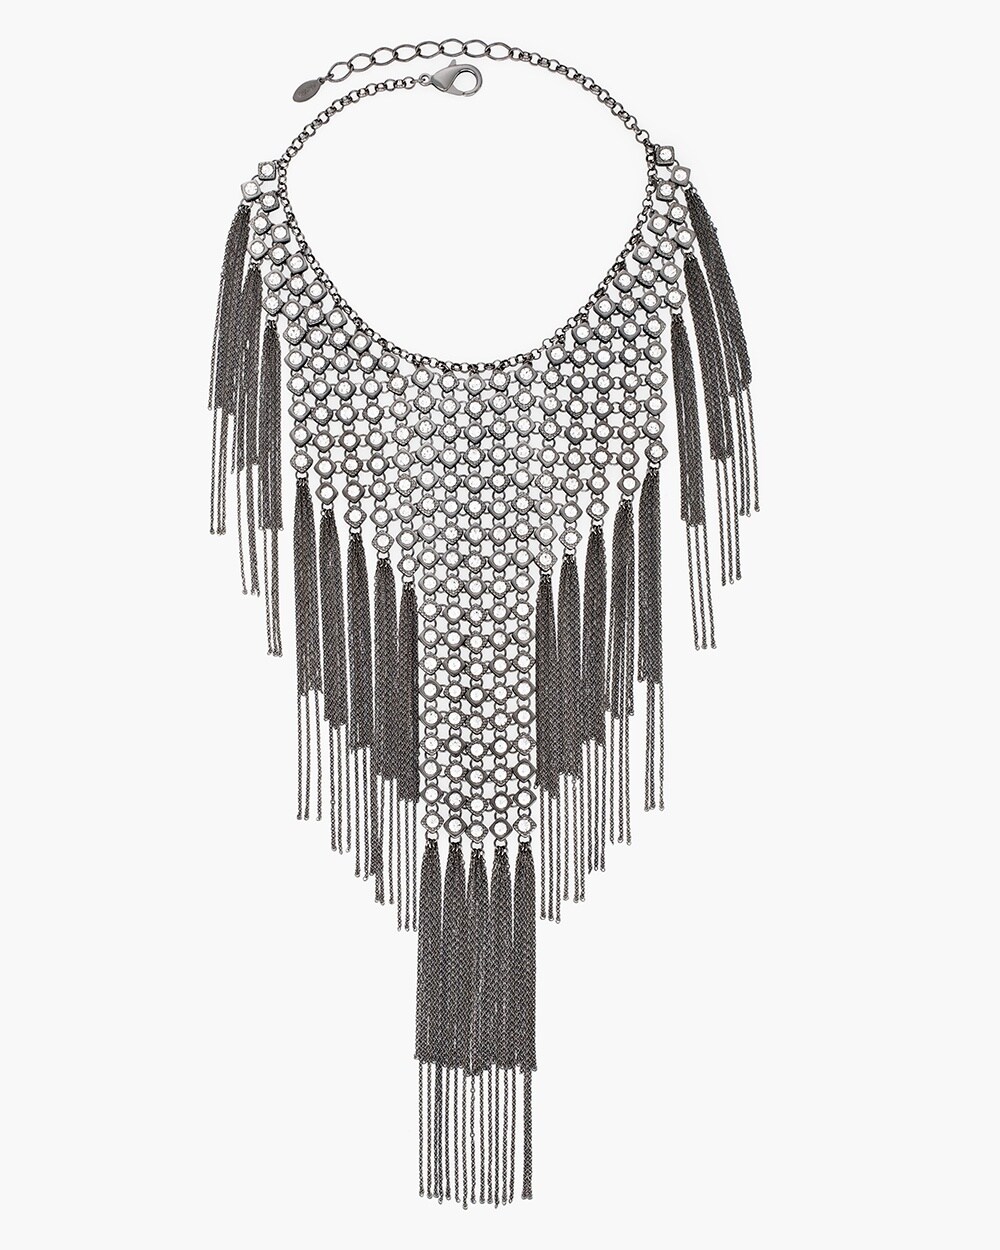 The Collectibles Clara Fringe Necklace